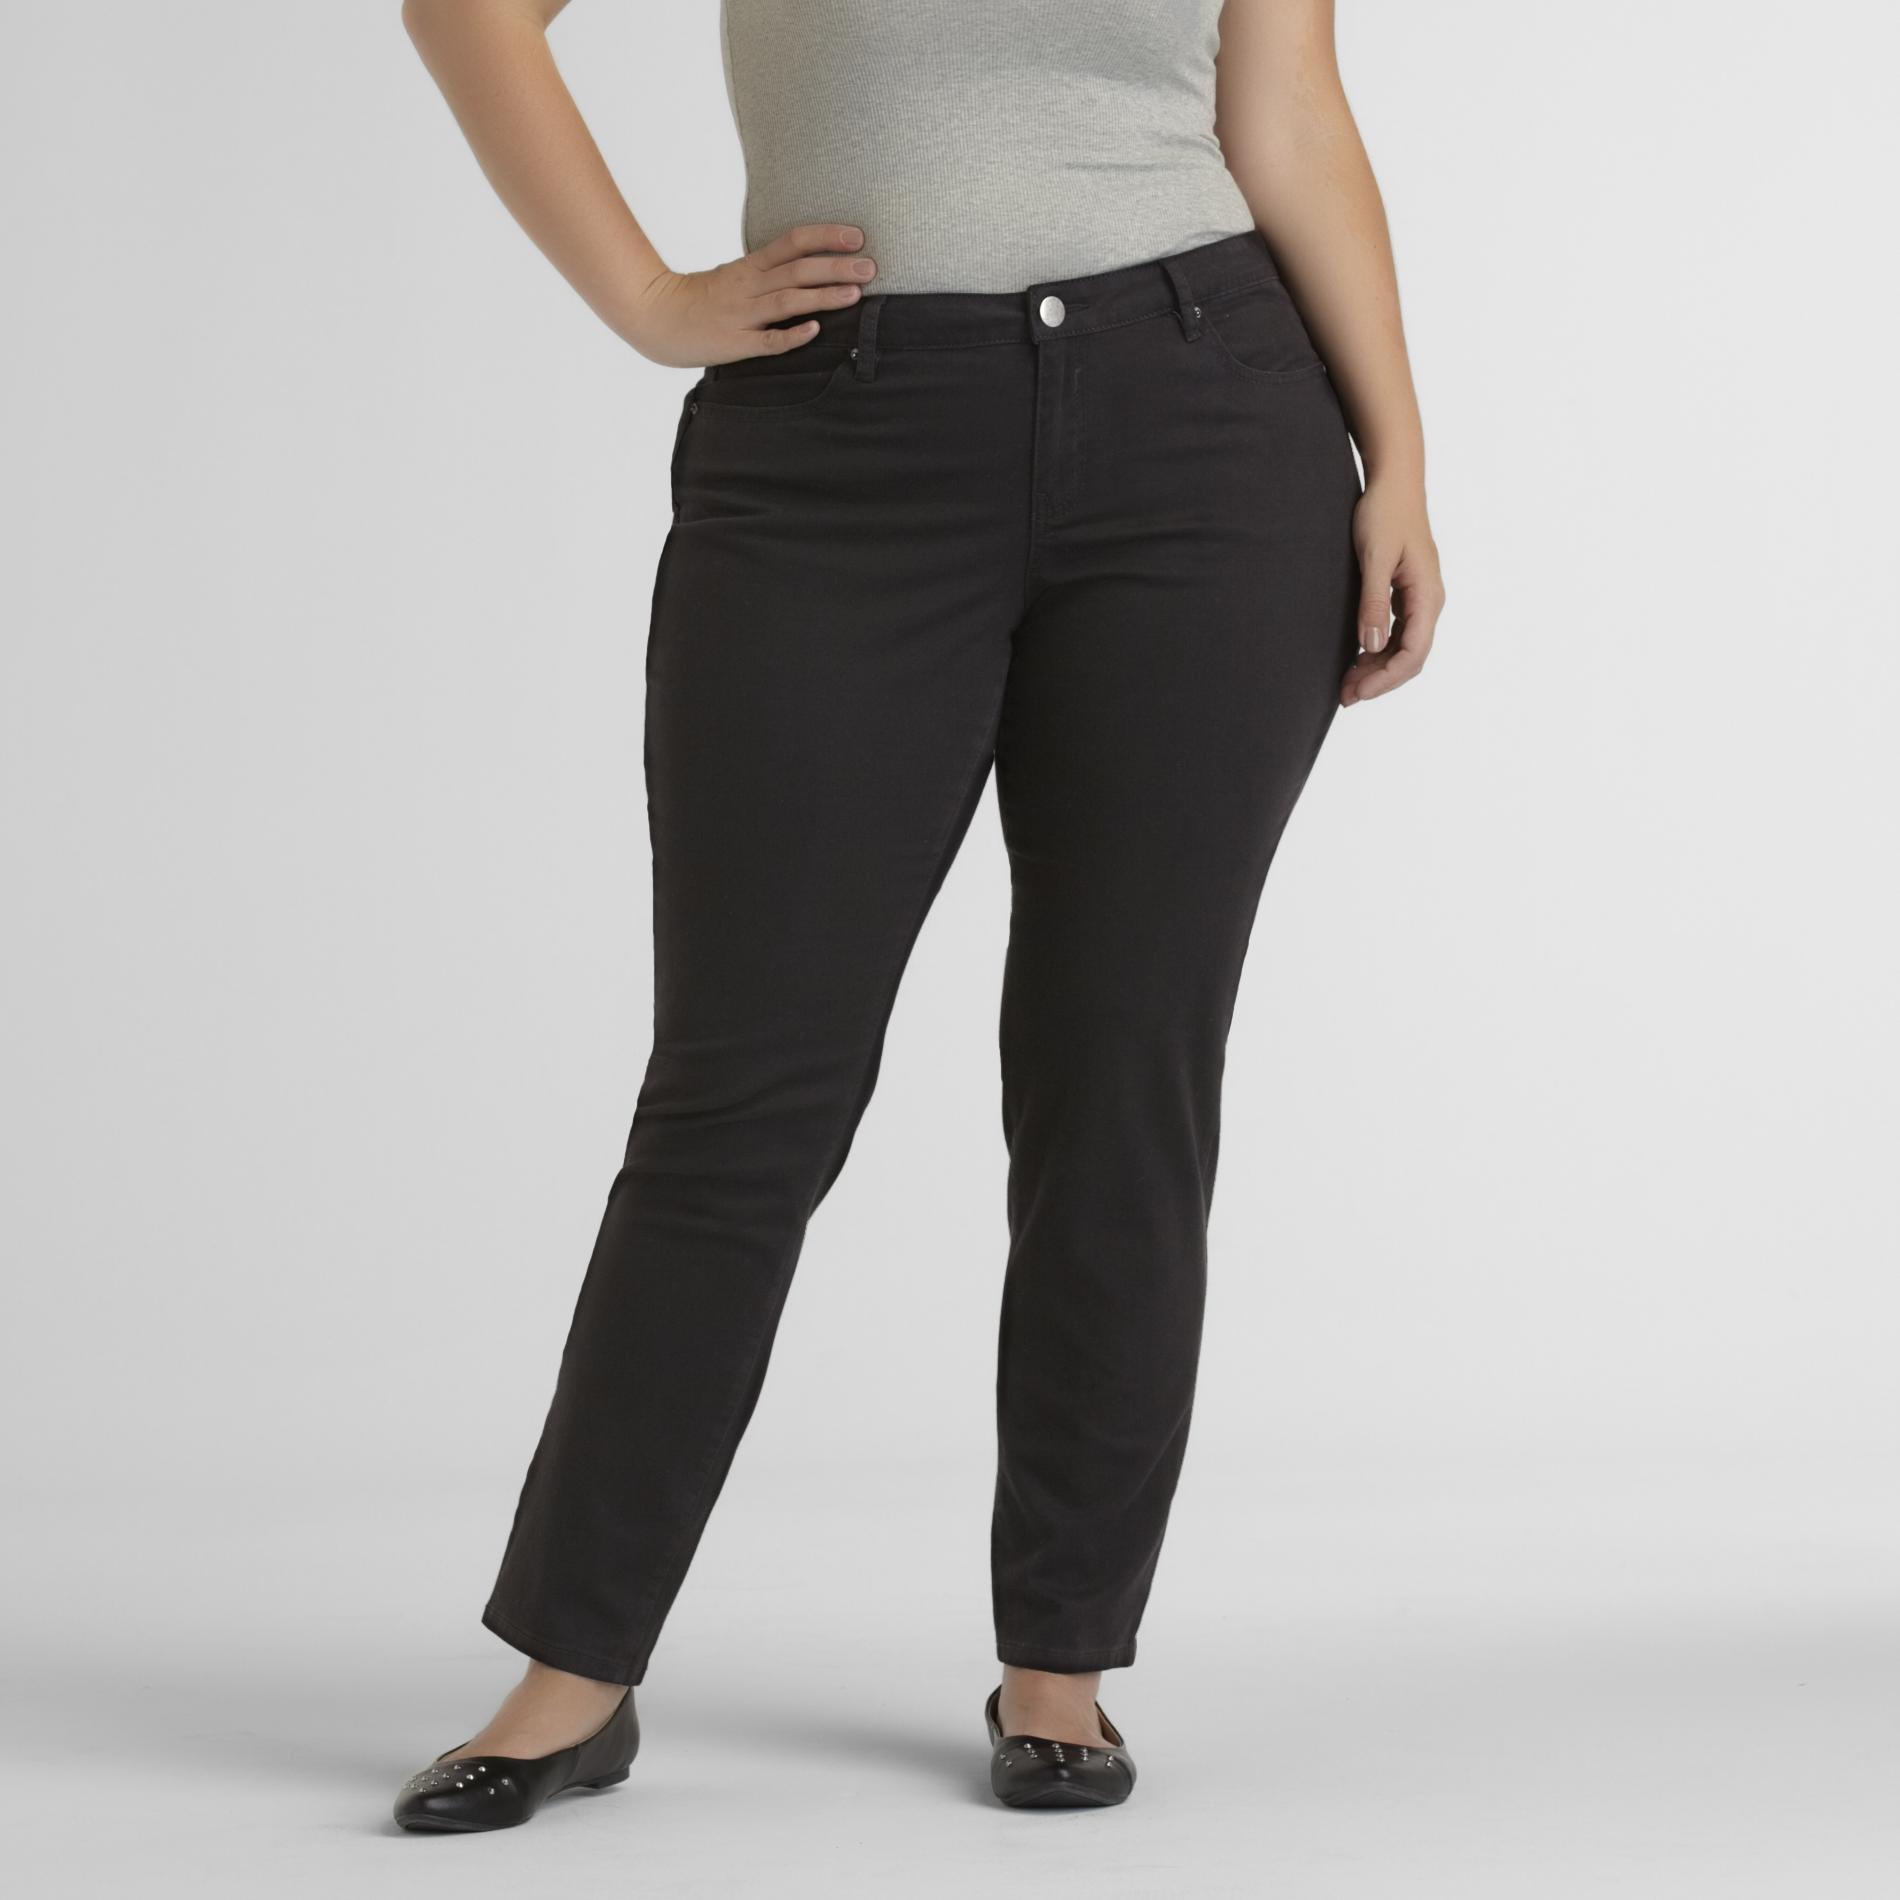 Love Your Style, Love Your Size Women's Plus Stretch Twill Jeggings